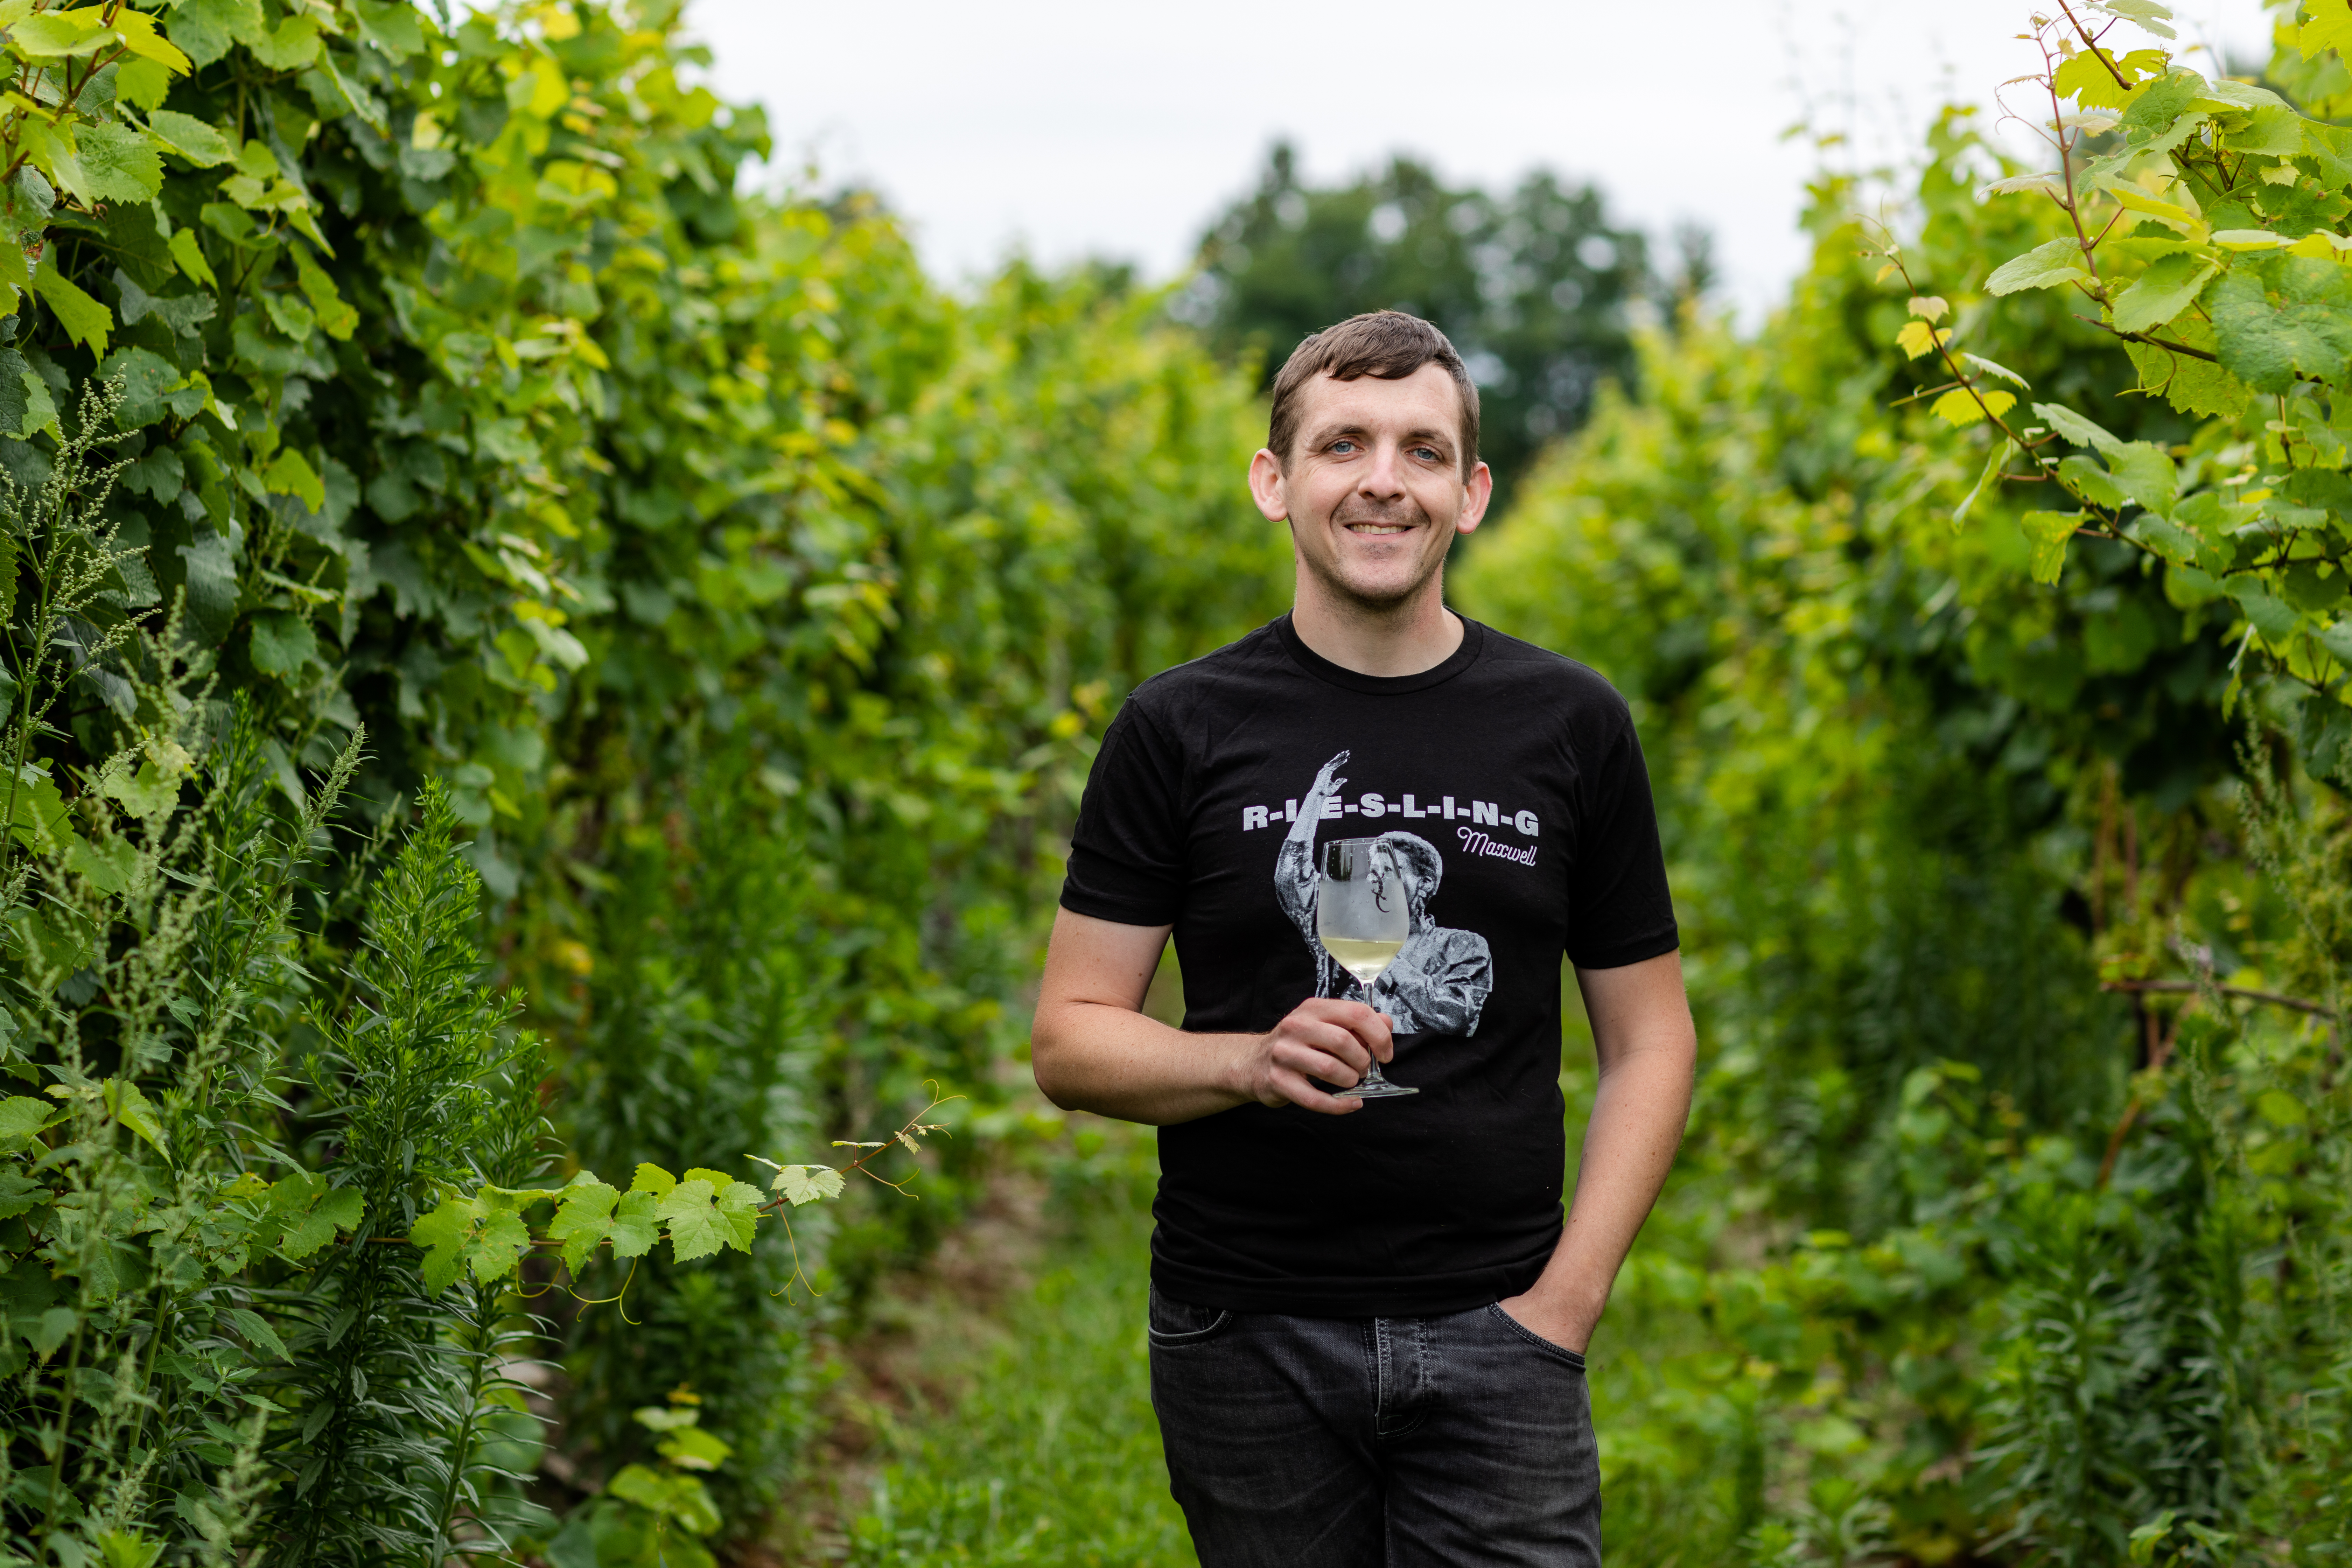 kelby james russell standing in a vineyard. he is wearing a black graphic tshirt and jeans, and holding a glass of white wine.